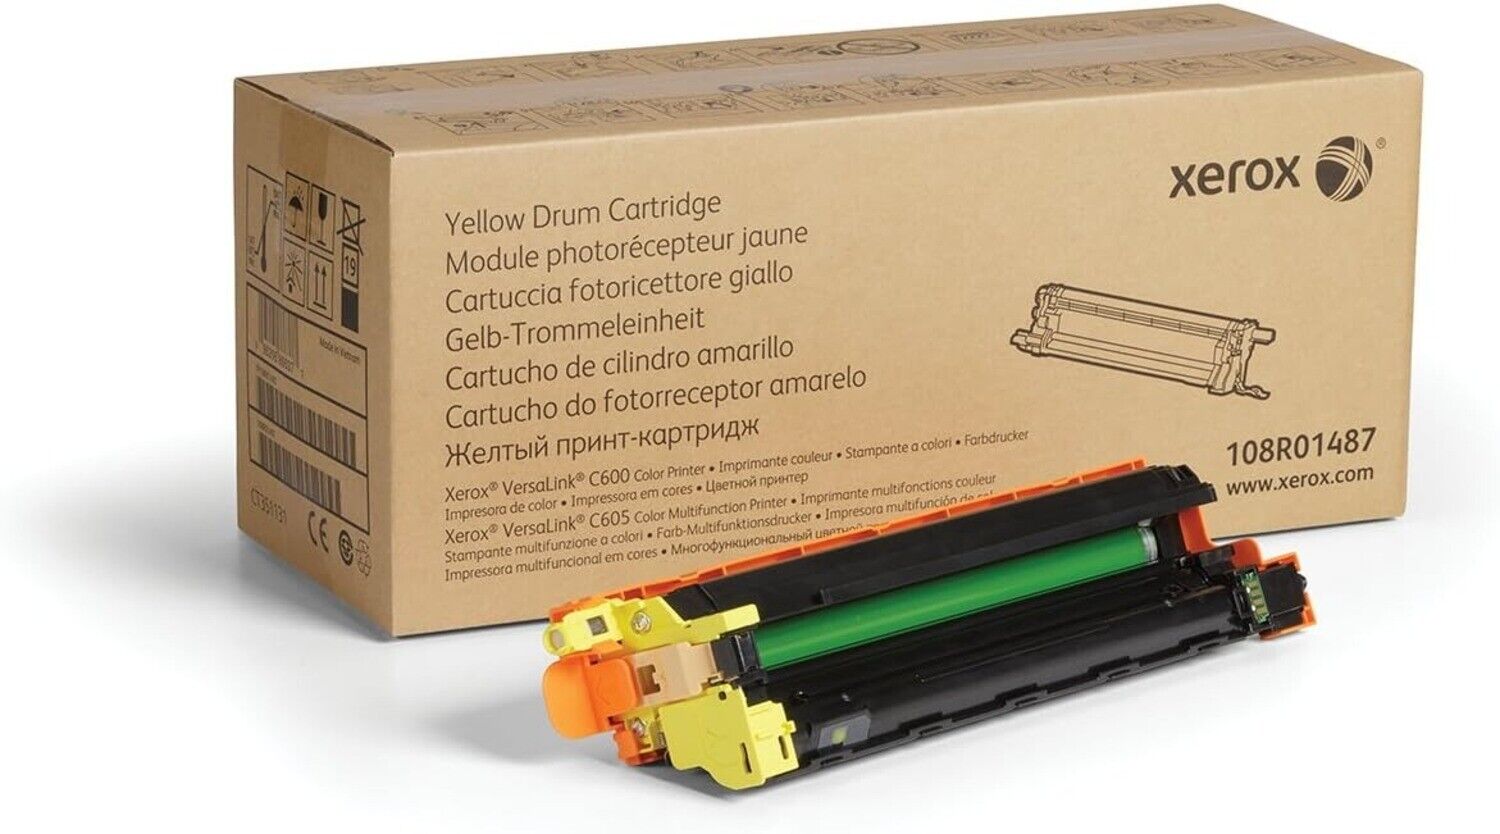 Genuine Xerox Genuine Yellow Drum Cartridge 108R01487 - 40 000 Pages for Use in